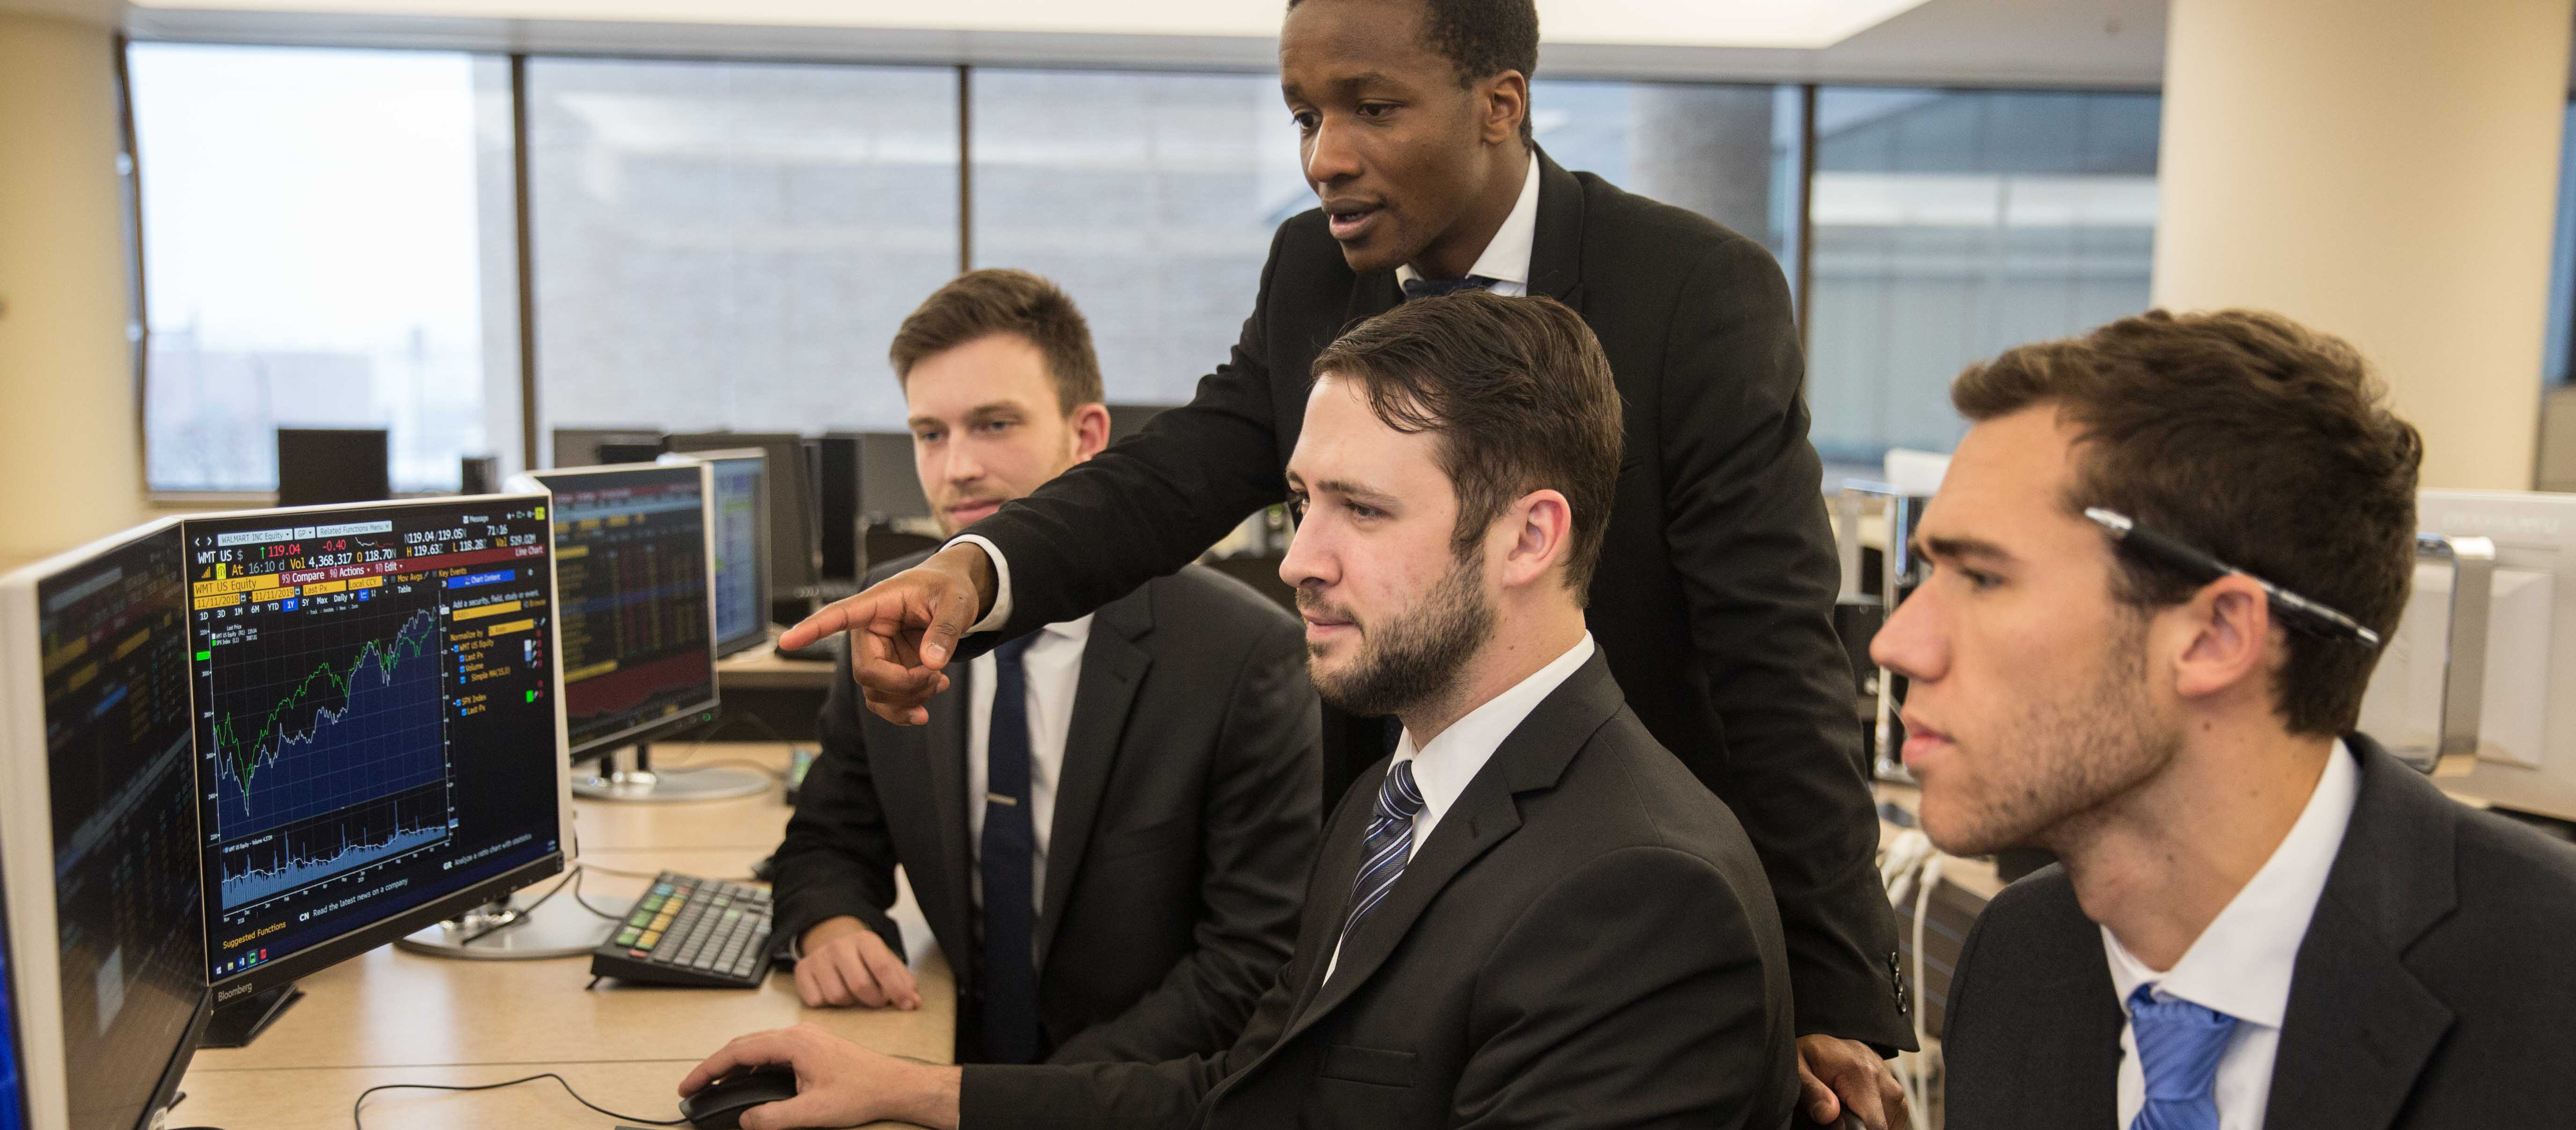 Four male students in suits look at computer screens.